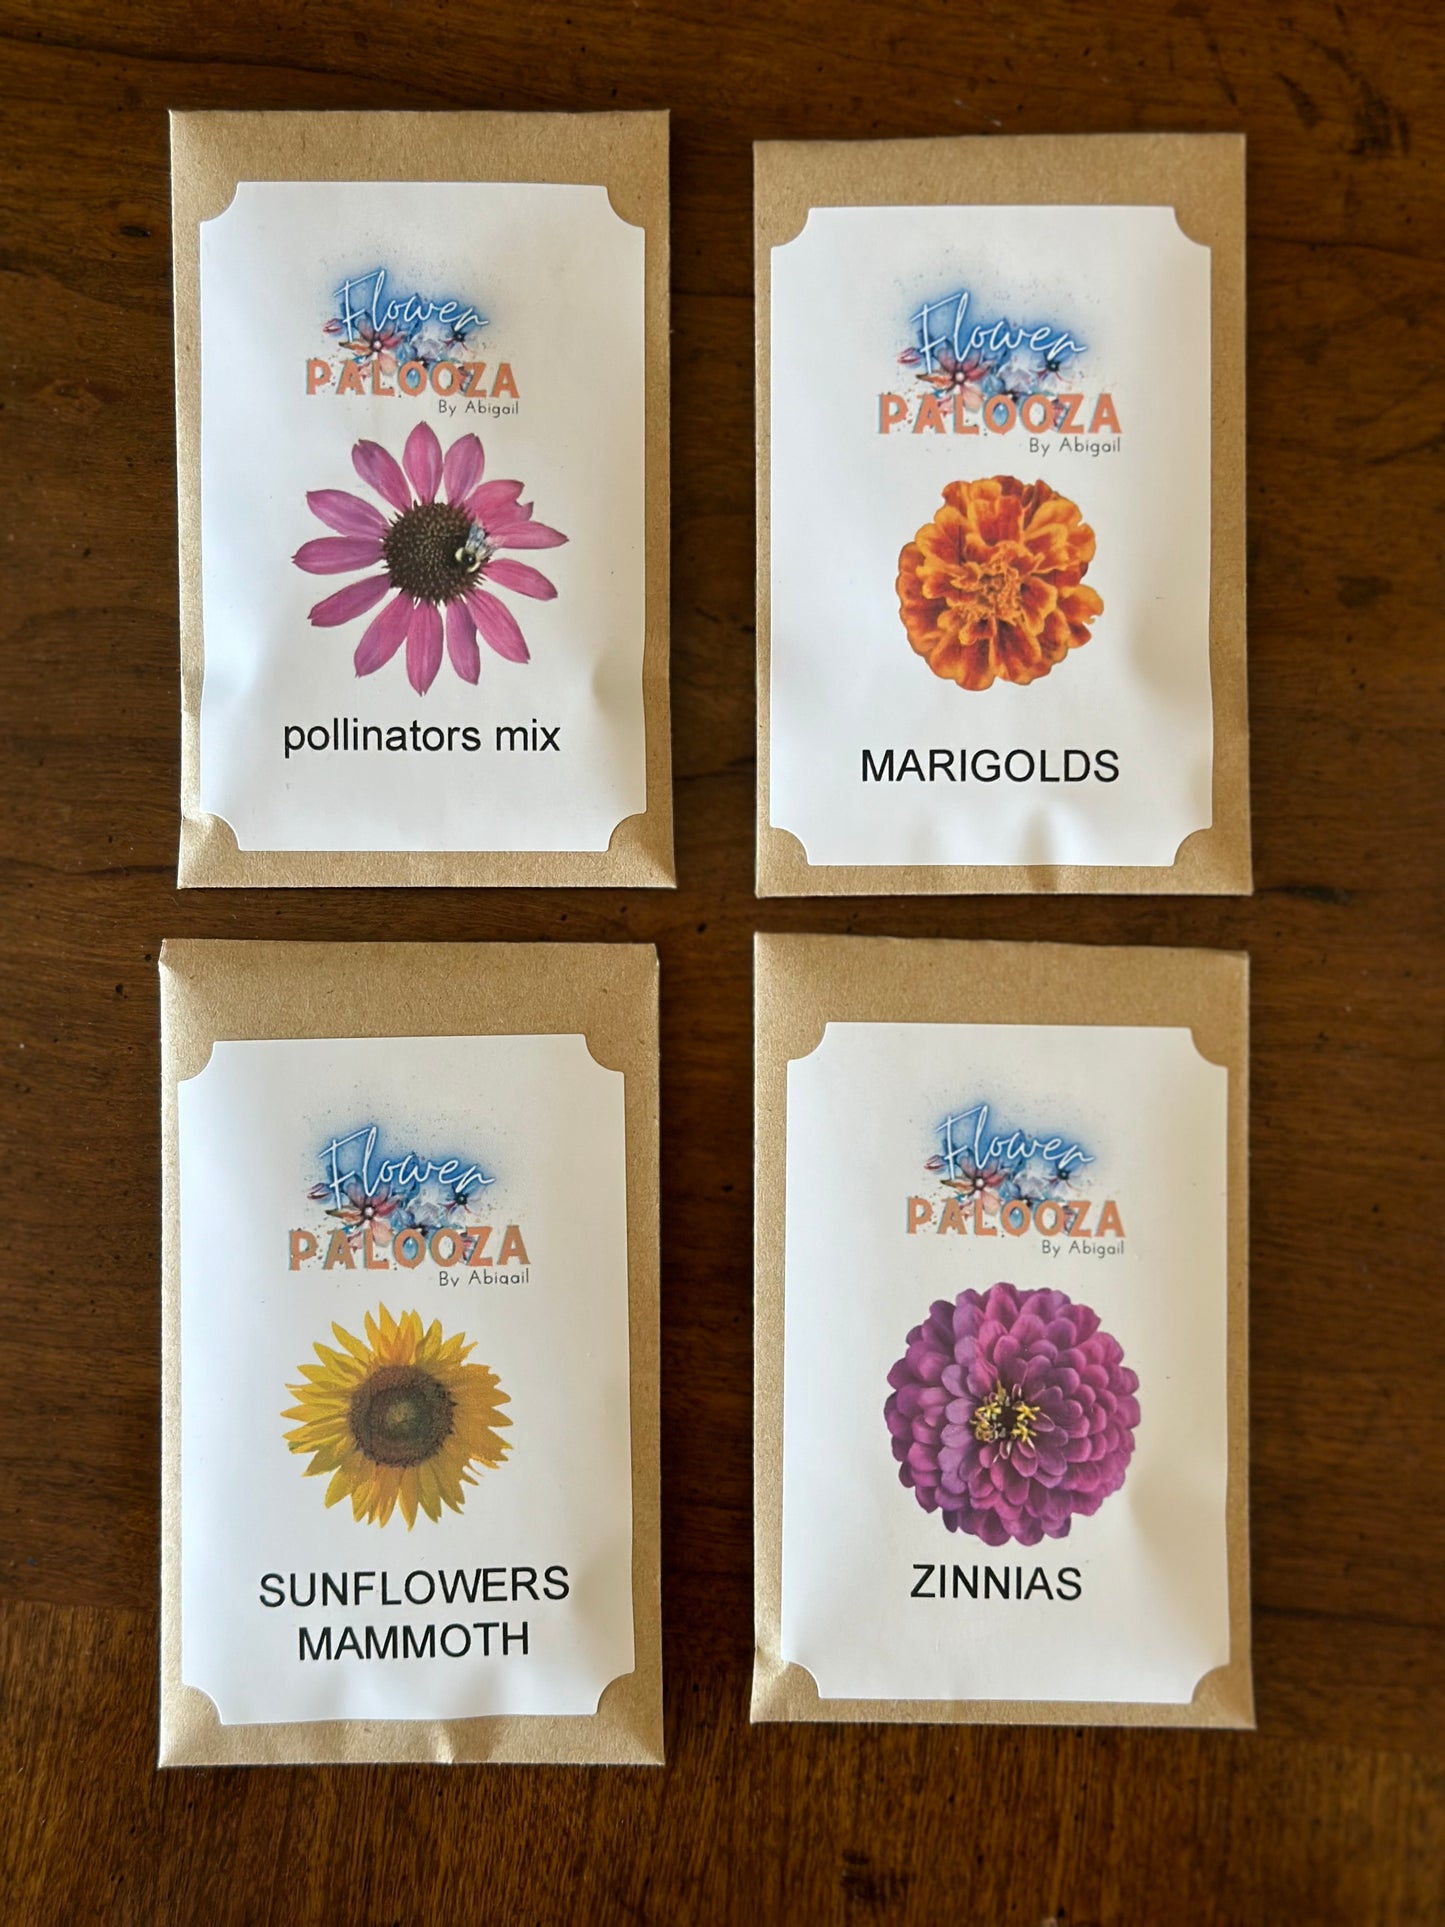 Spring Seeds Variety Pack- Abigail’s Garden Party